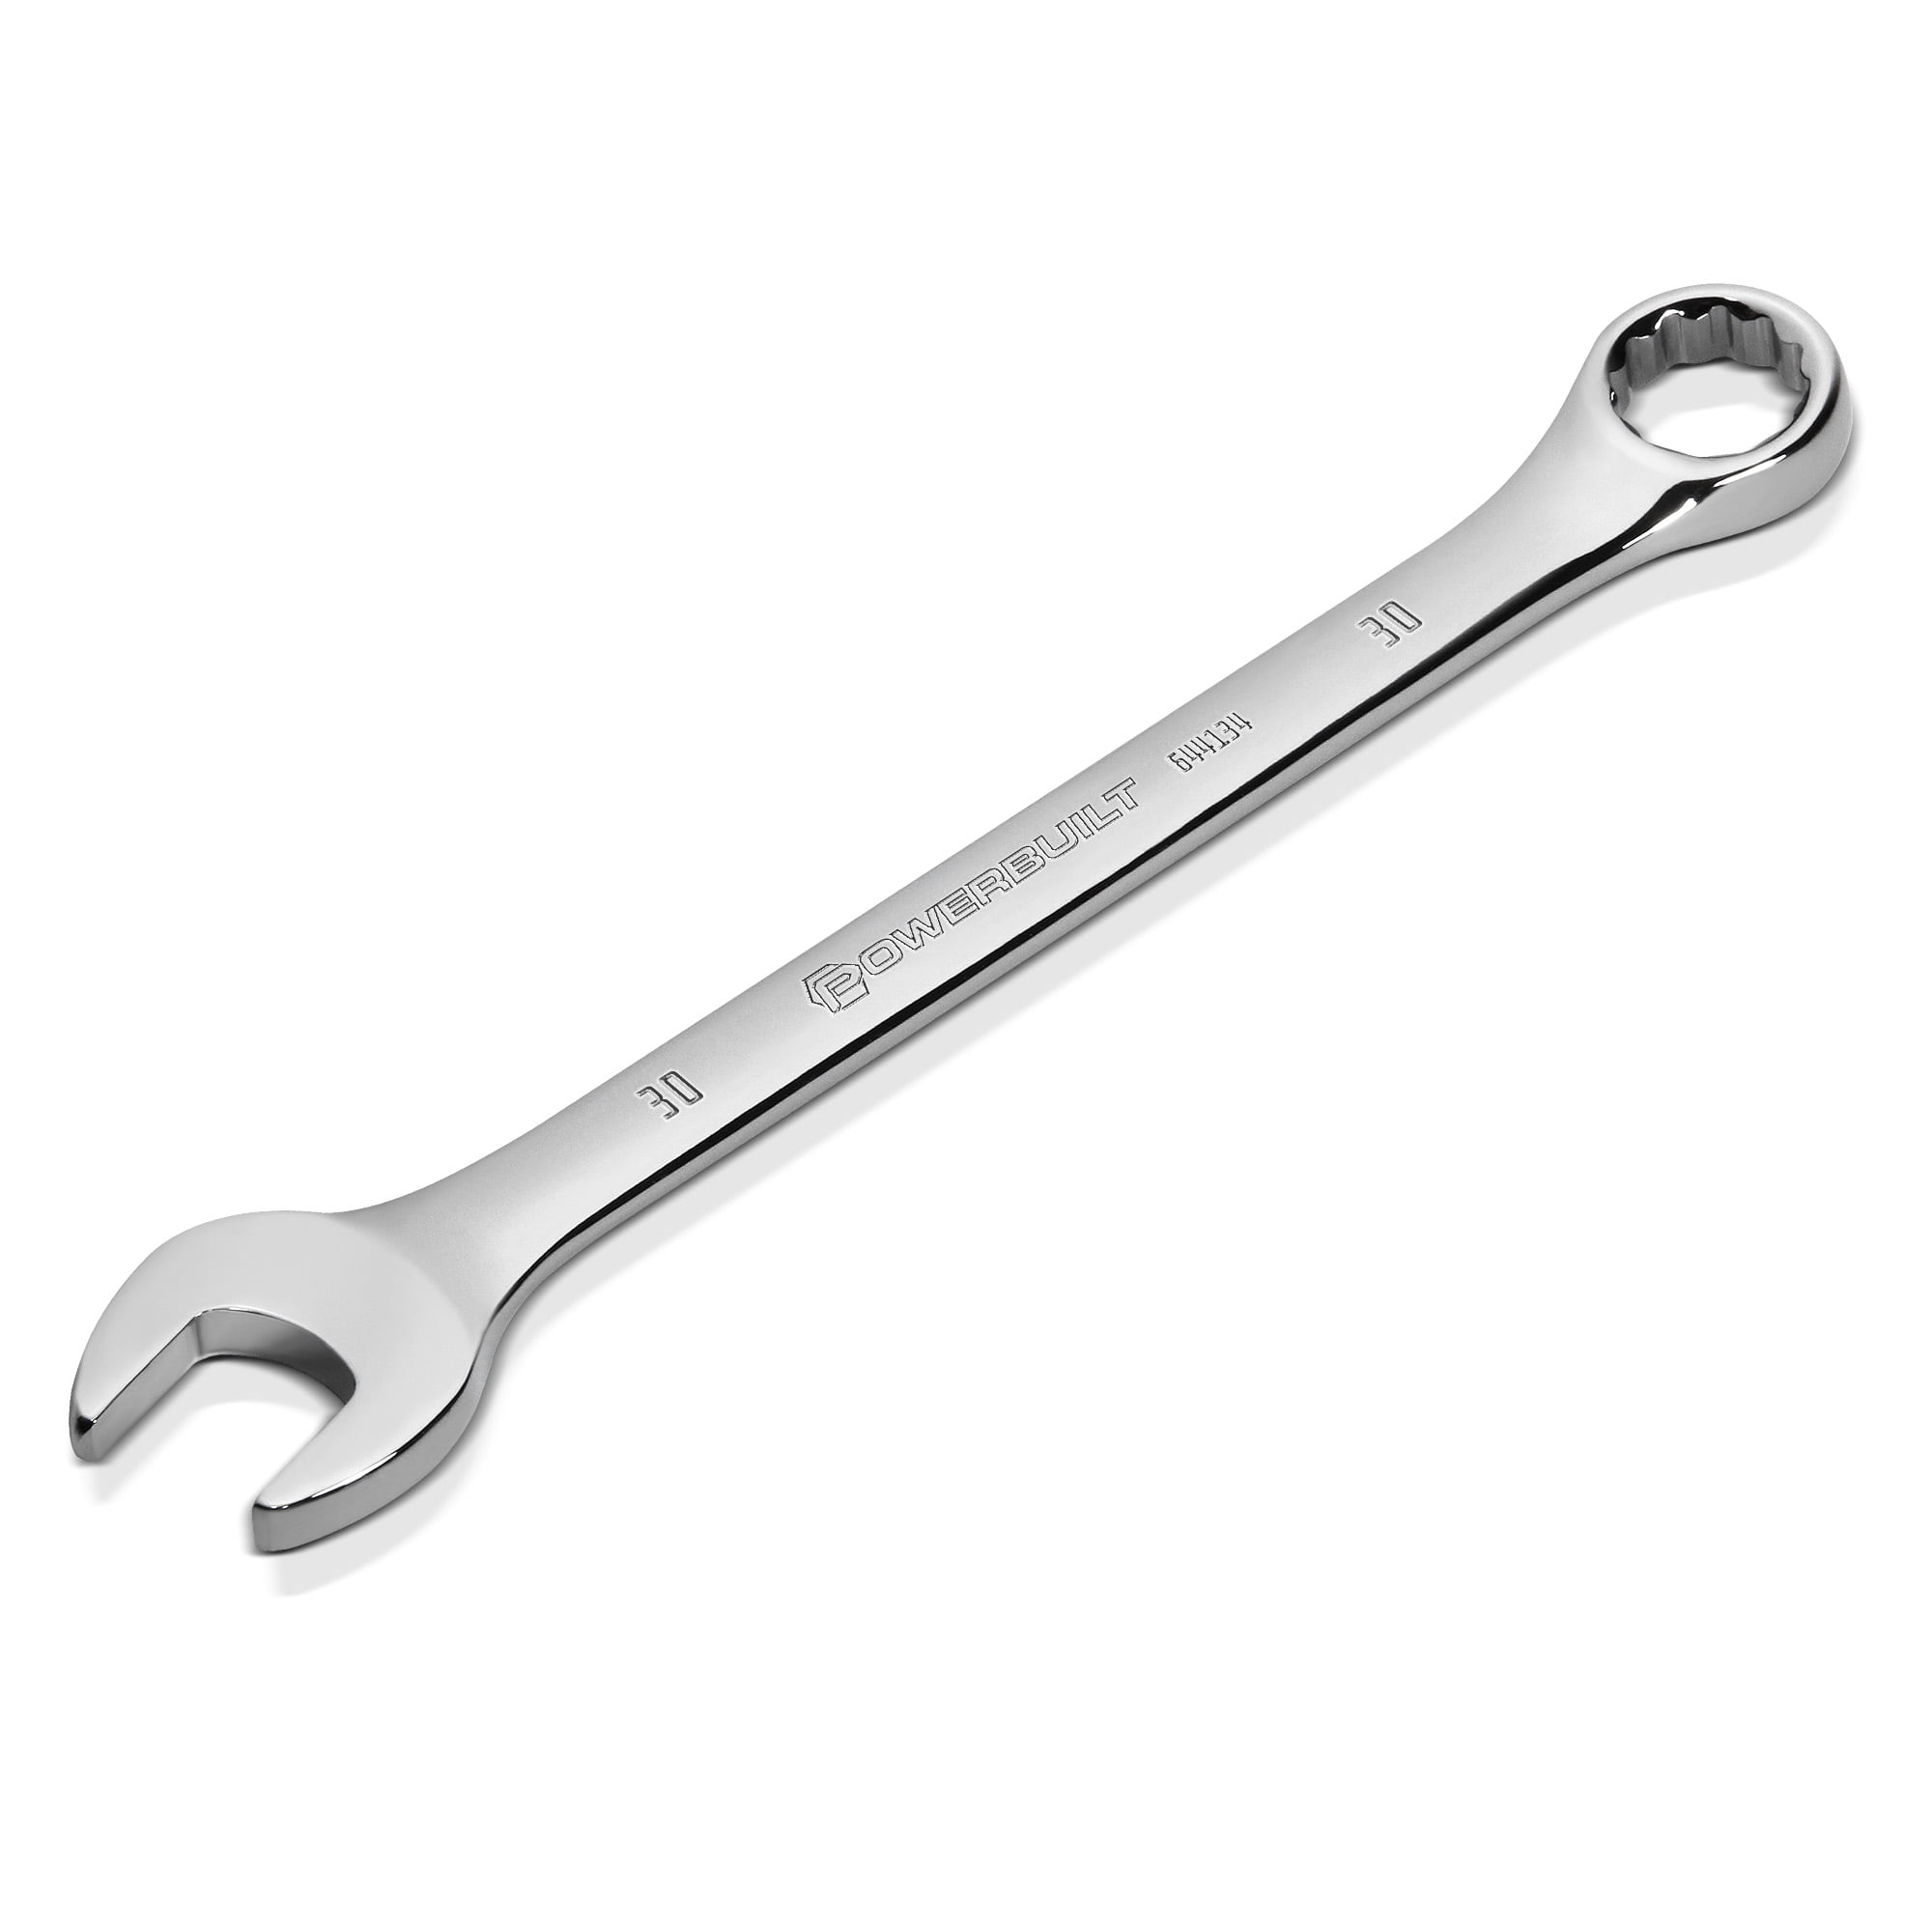 Sunex 993015M 15 mm Fully Polished Stubby Combination Wrench